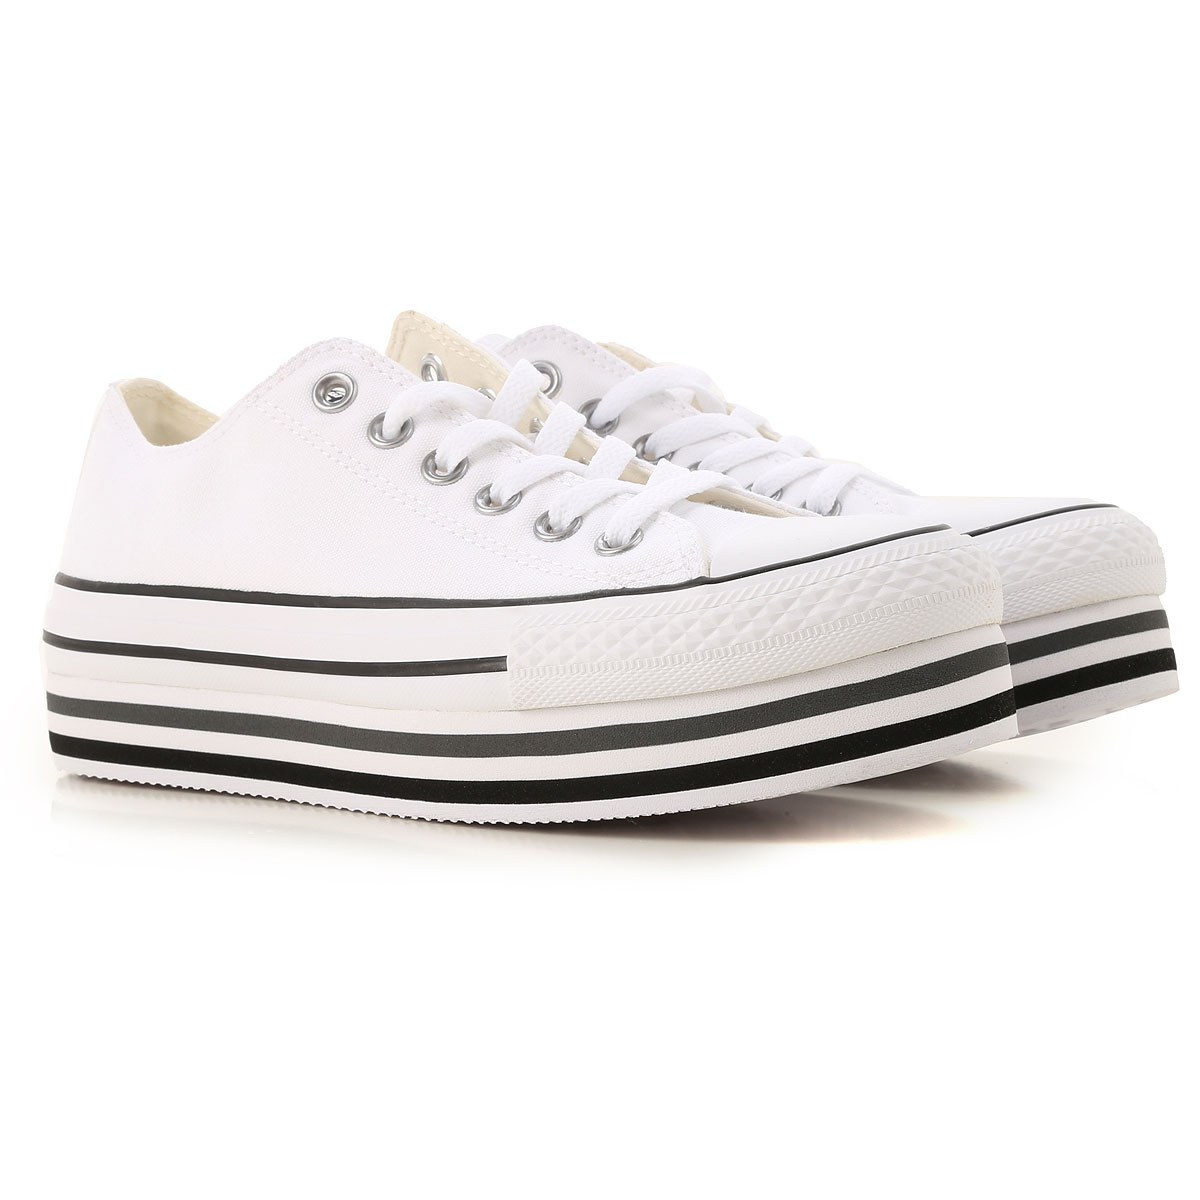 Womens Shoes Converse, Style code: 563971c-207-